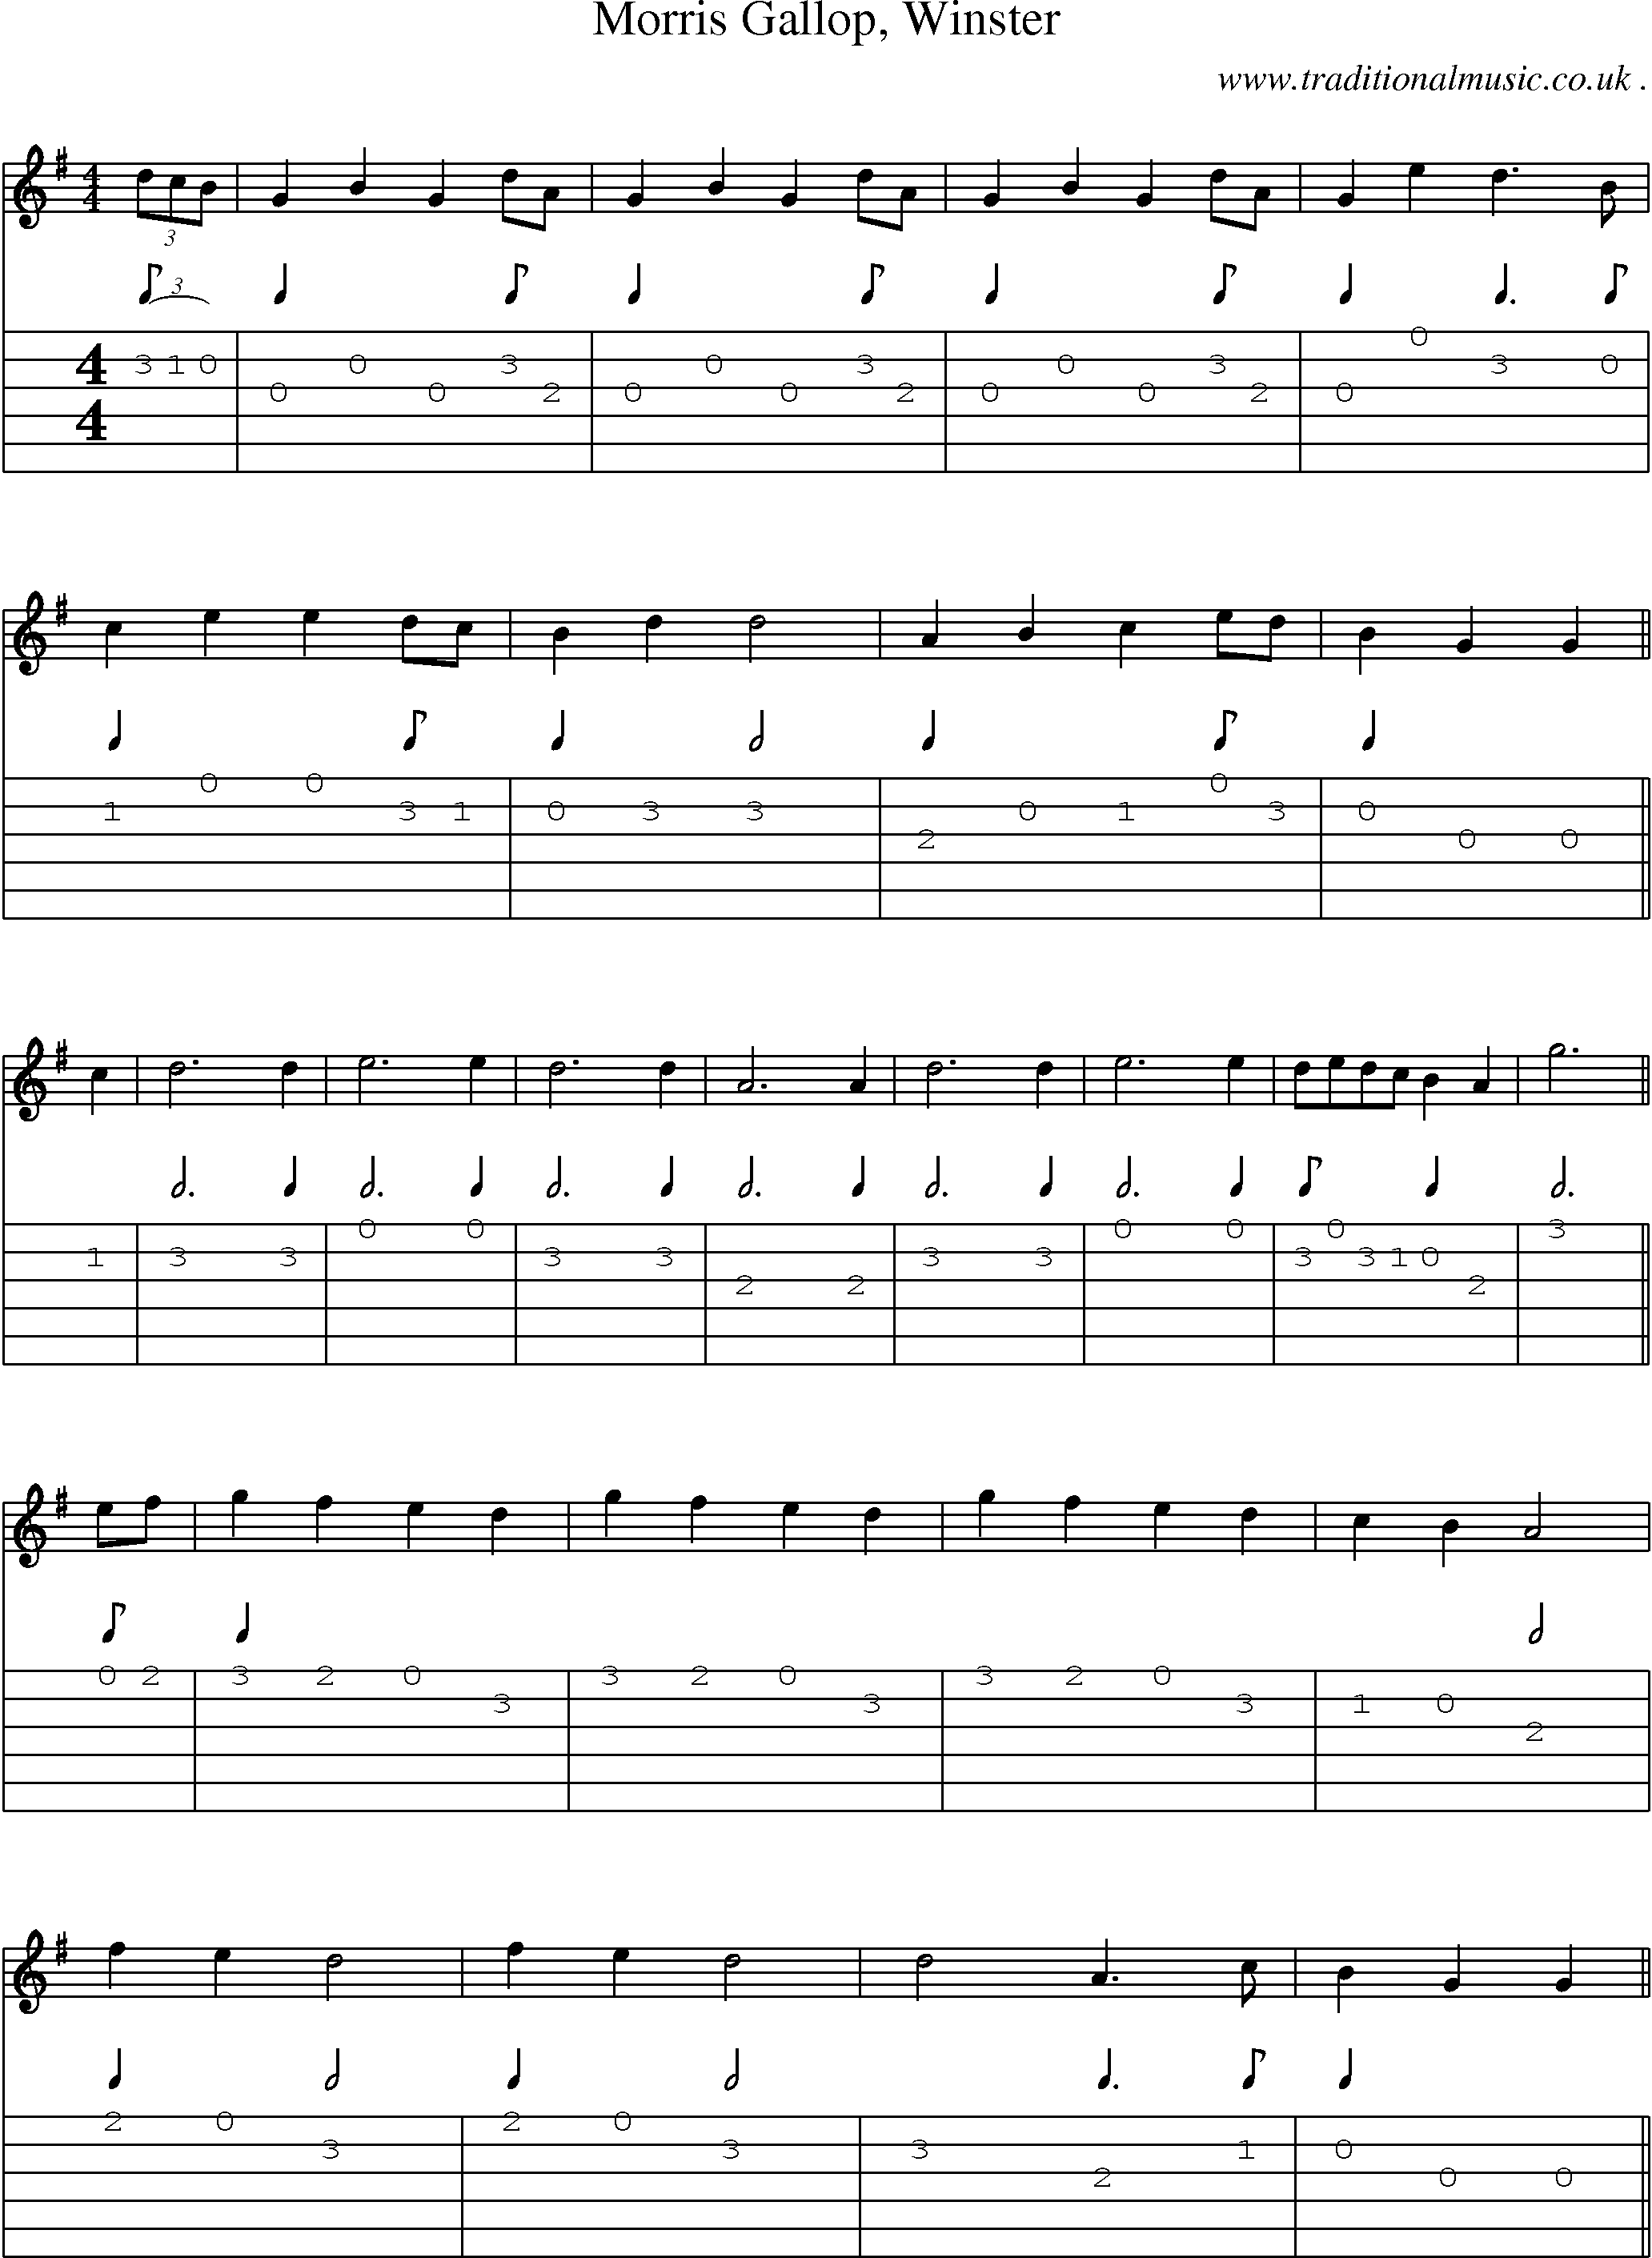 Sheet-Music and Guitar Tabs for Morris Gallop Winster